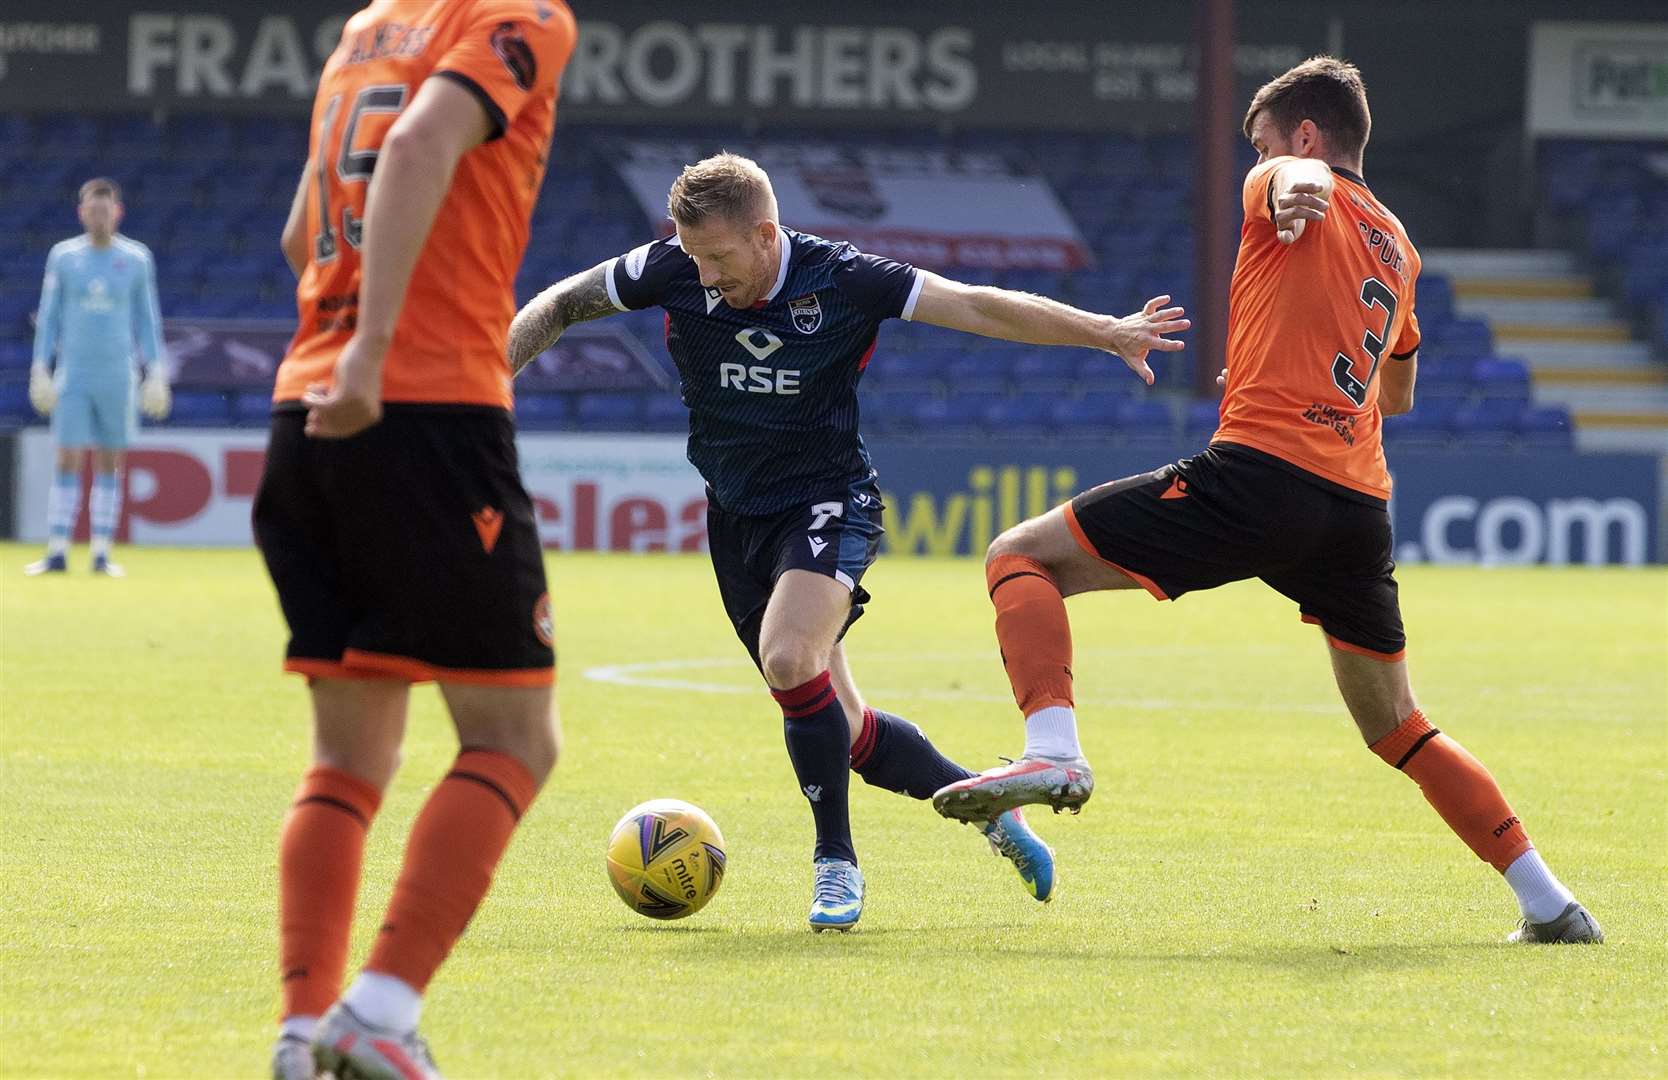 Picture - Ken Macpherson, Inverness. Ross County(1) v Dundee United(2). 15.08.20. Ross County's Michael Gardyne gets away from Dundee Utd's Adrian Sporle.